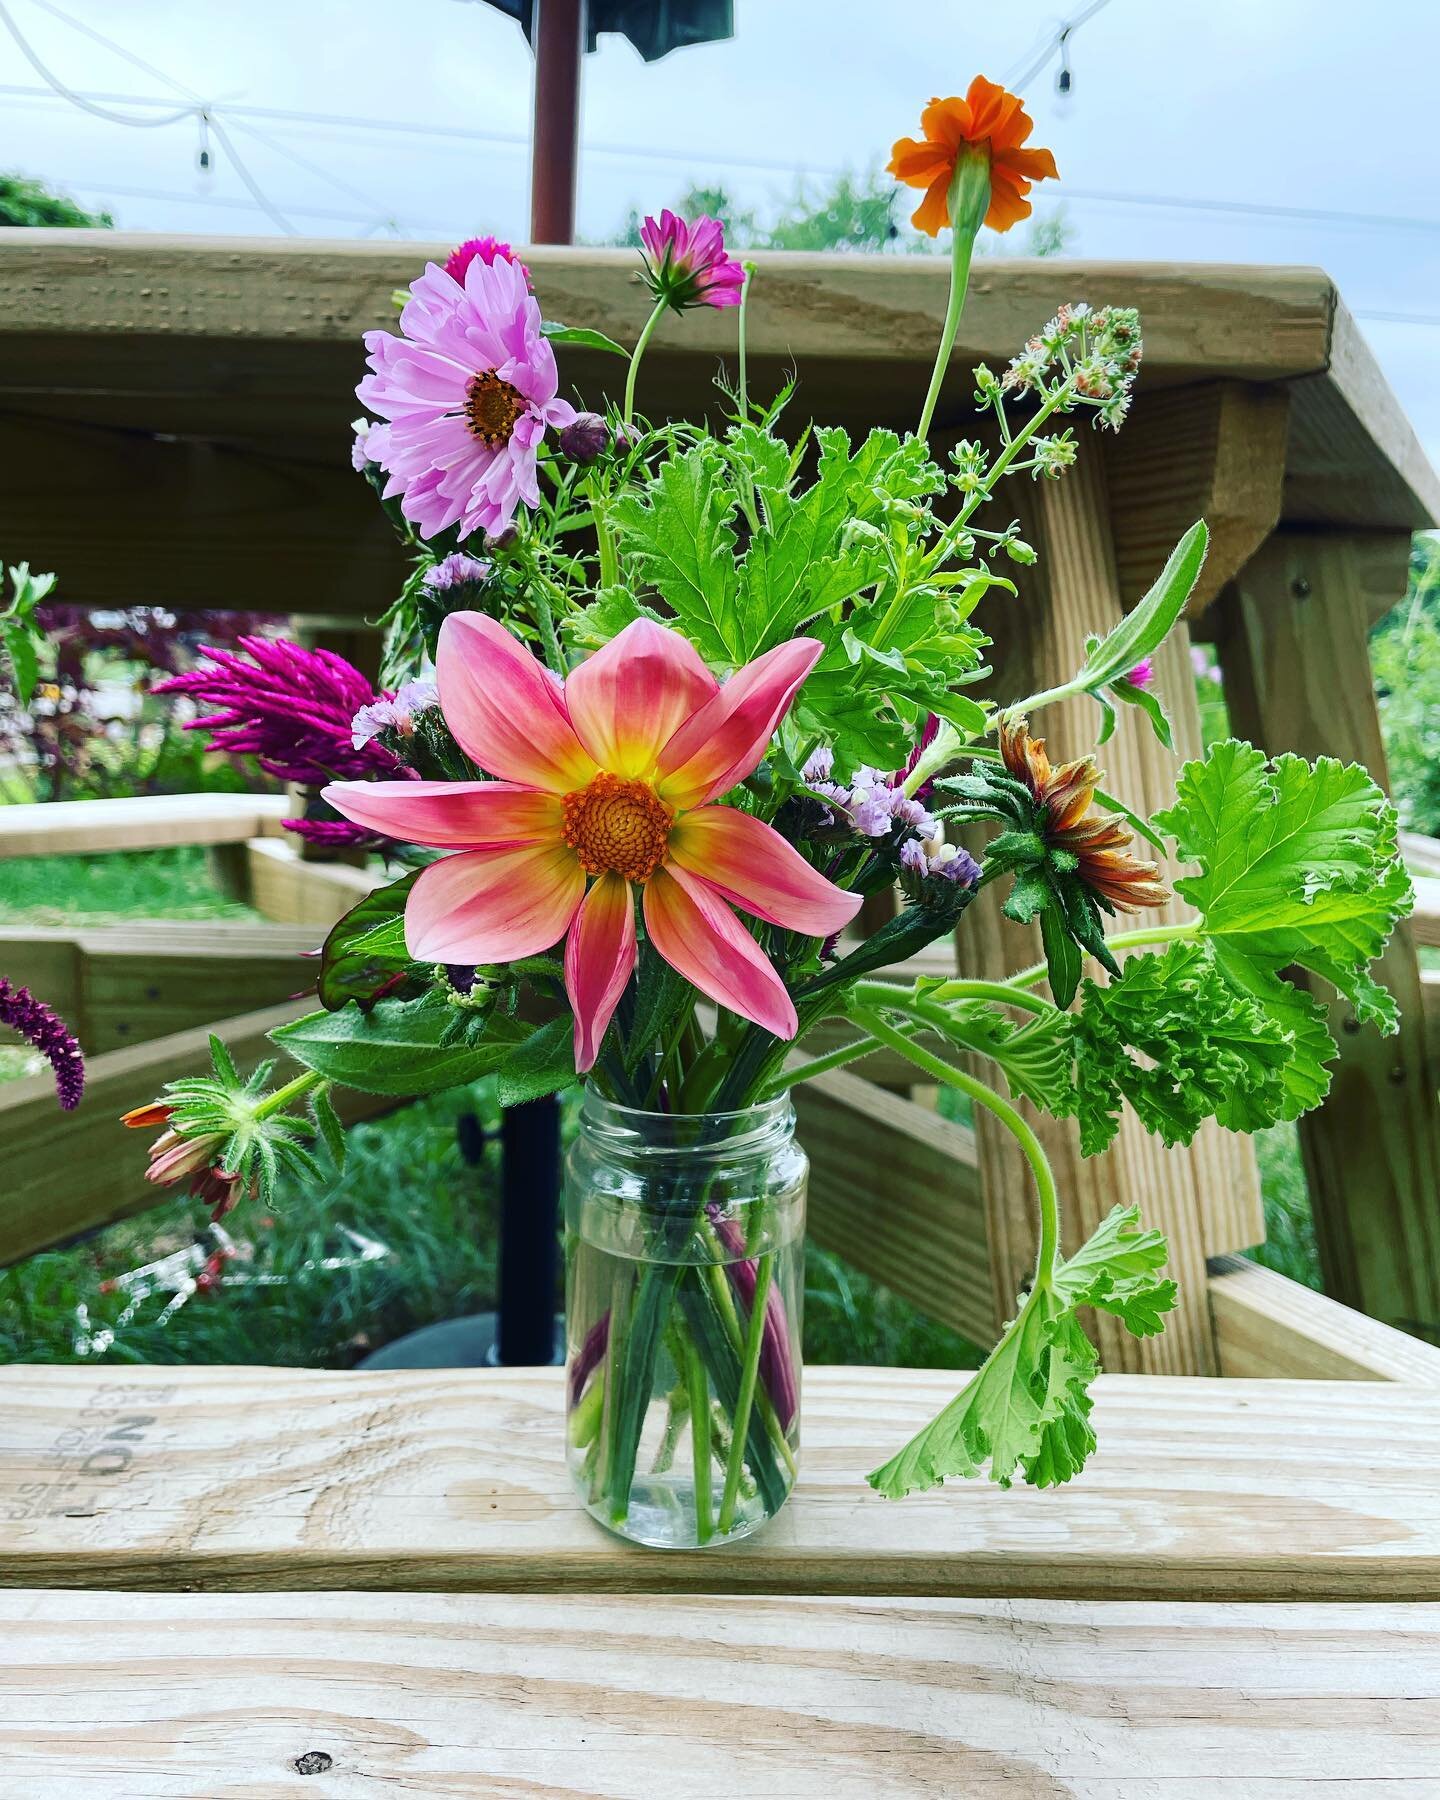 This dahlia was grown from seed, which means I was 100% surprised by its beauty when it bloomed. It&rsquo;s one of the best kinds of surprises.

These flowers are available for purchase! I have two extra arrangements today. $10 each. Pick up in the P